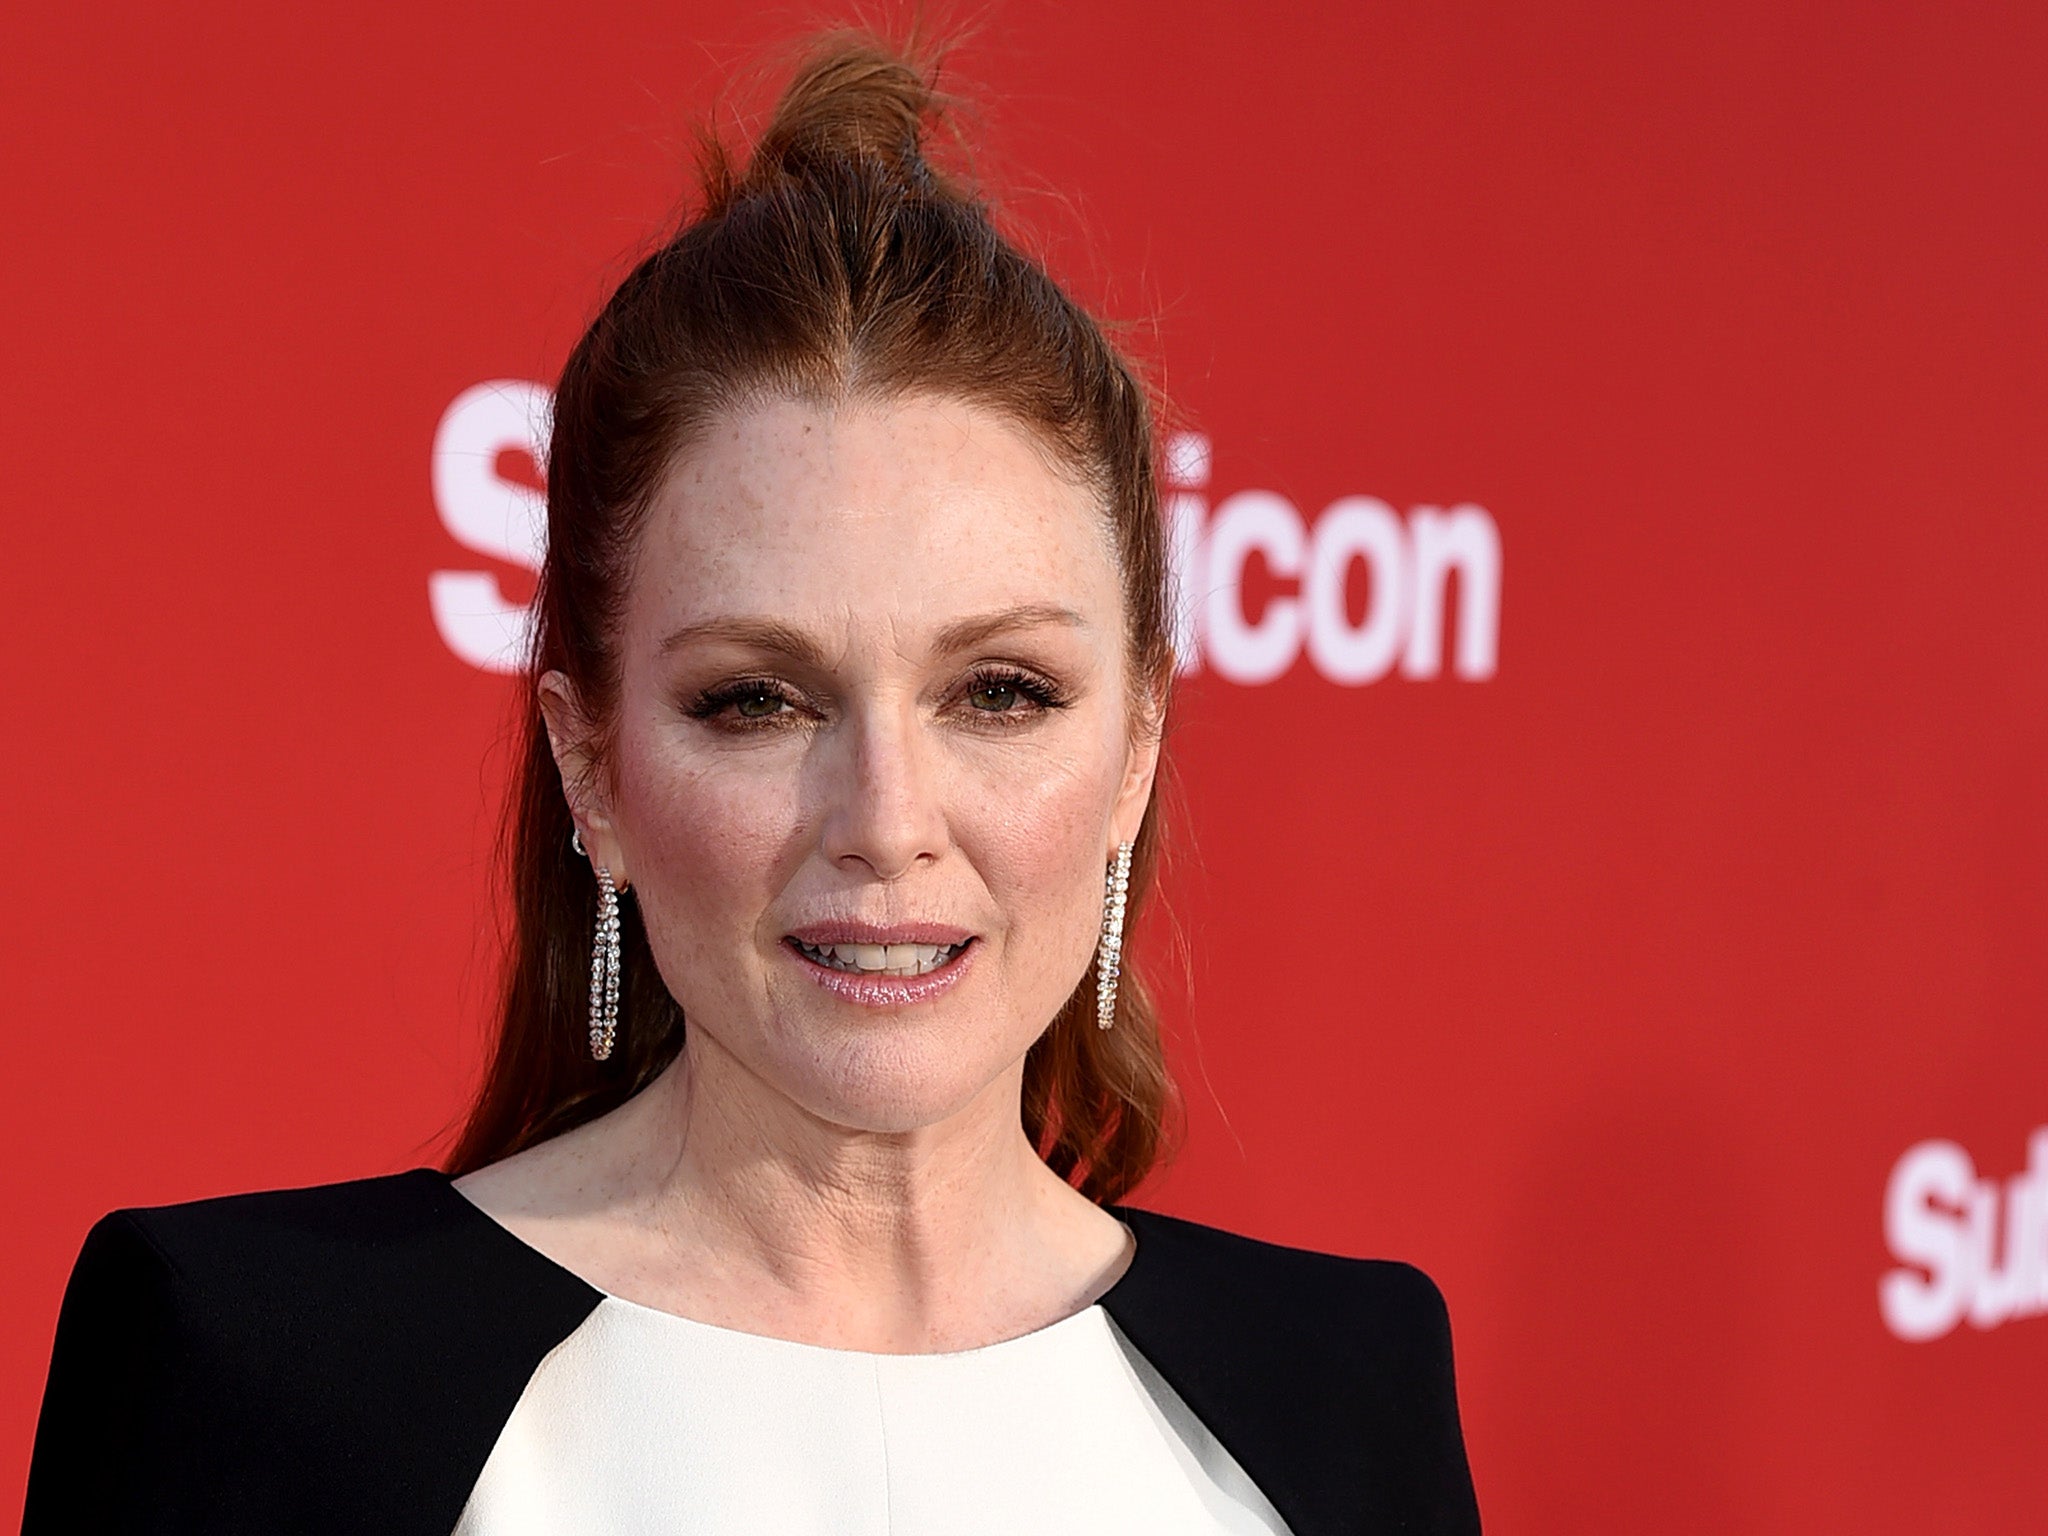 Actress Julianne Moore, pictured at the premiere of 'Suburbicon', says she hopes Harvey Weinstein will be prosecuted